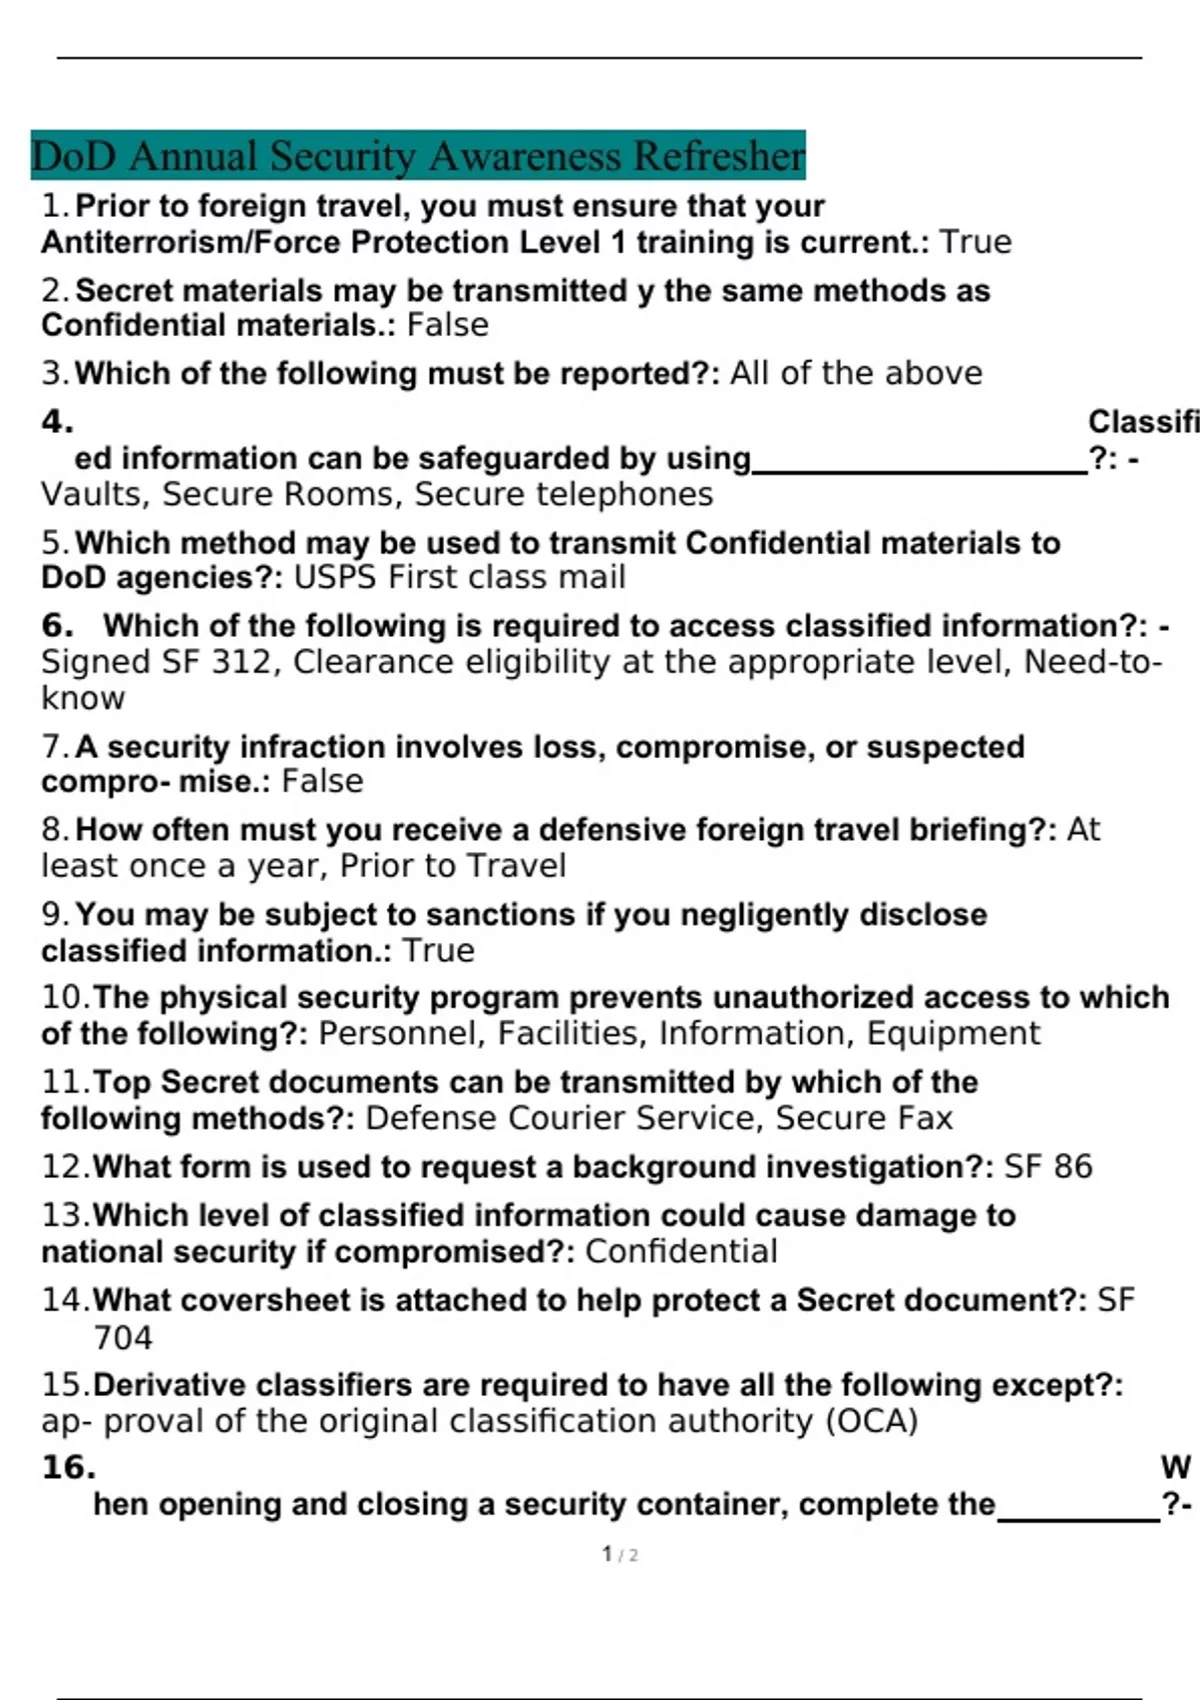 DoD Annual Security Awareness Refresher 2022/2023 Verified Answers